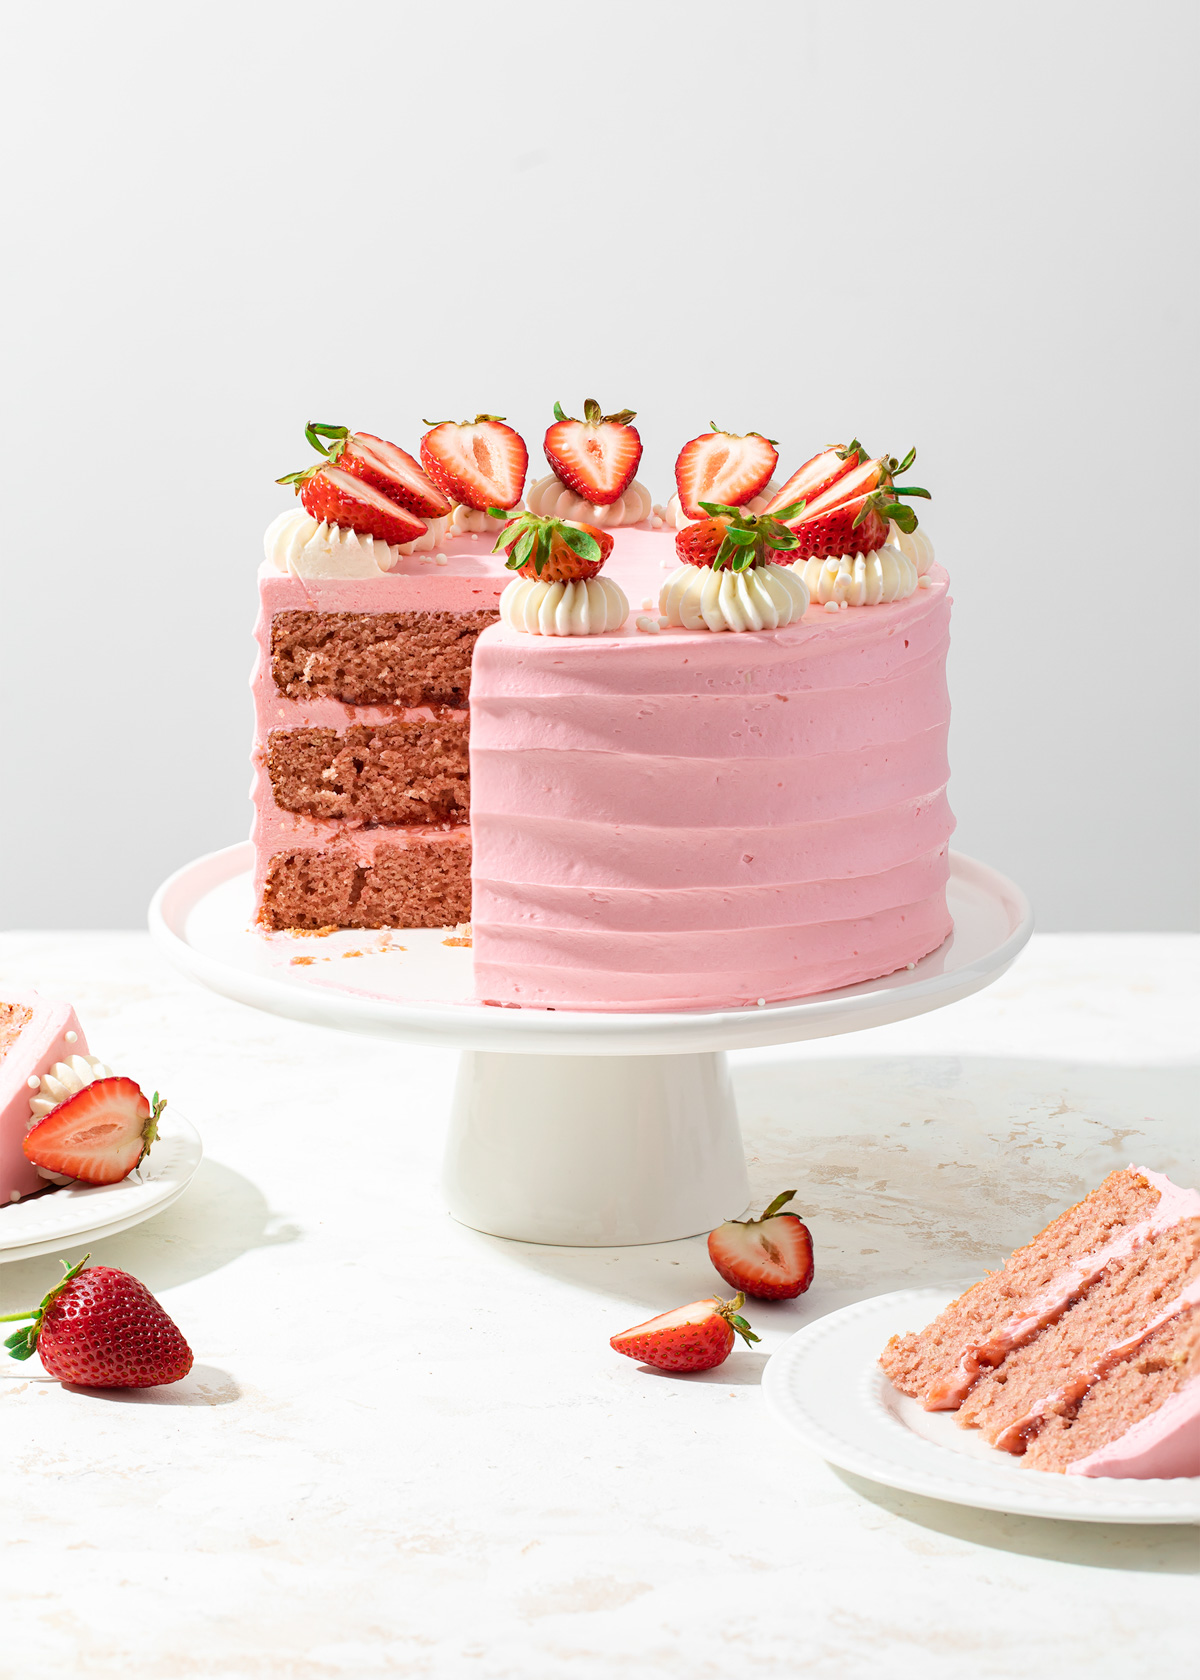 A three-layer strawberry cake with strawberry jam filling and pink frosting on a white cake stand.
